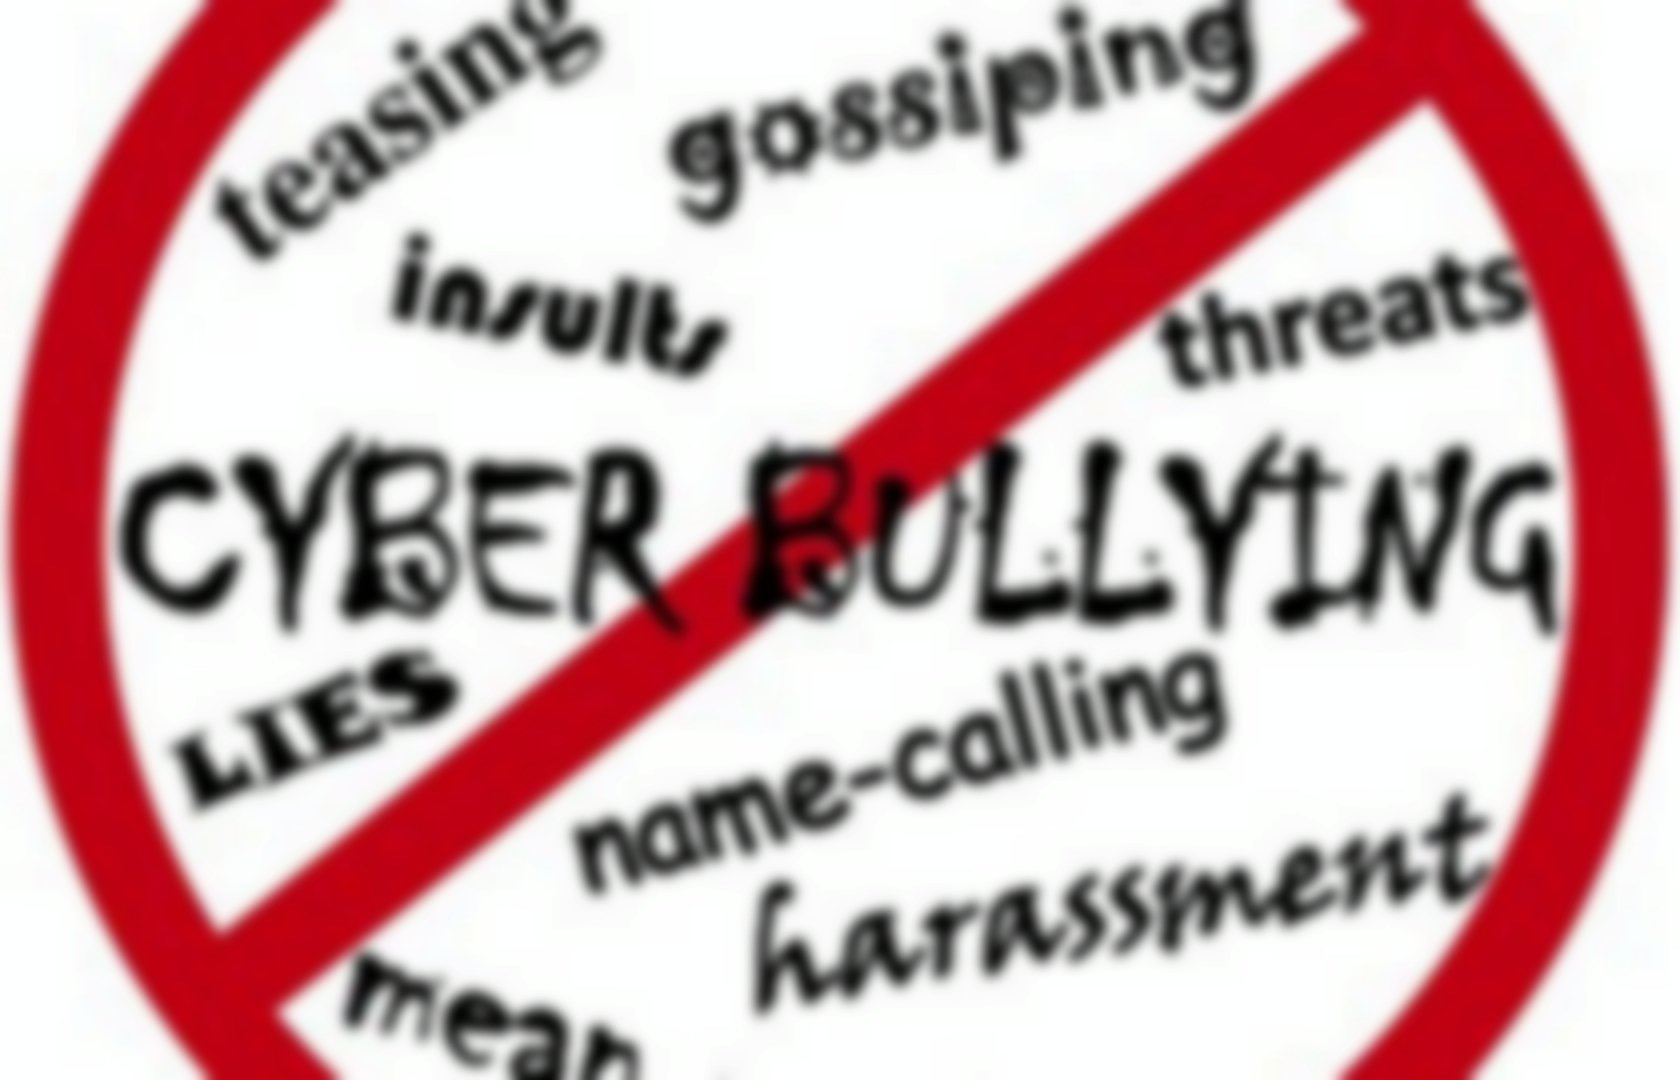 Be safe online - Stop Cyberbullying - Create a Positive Digital ...